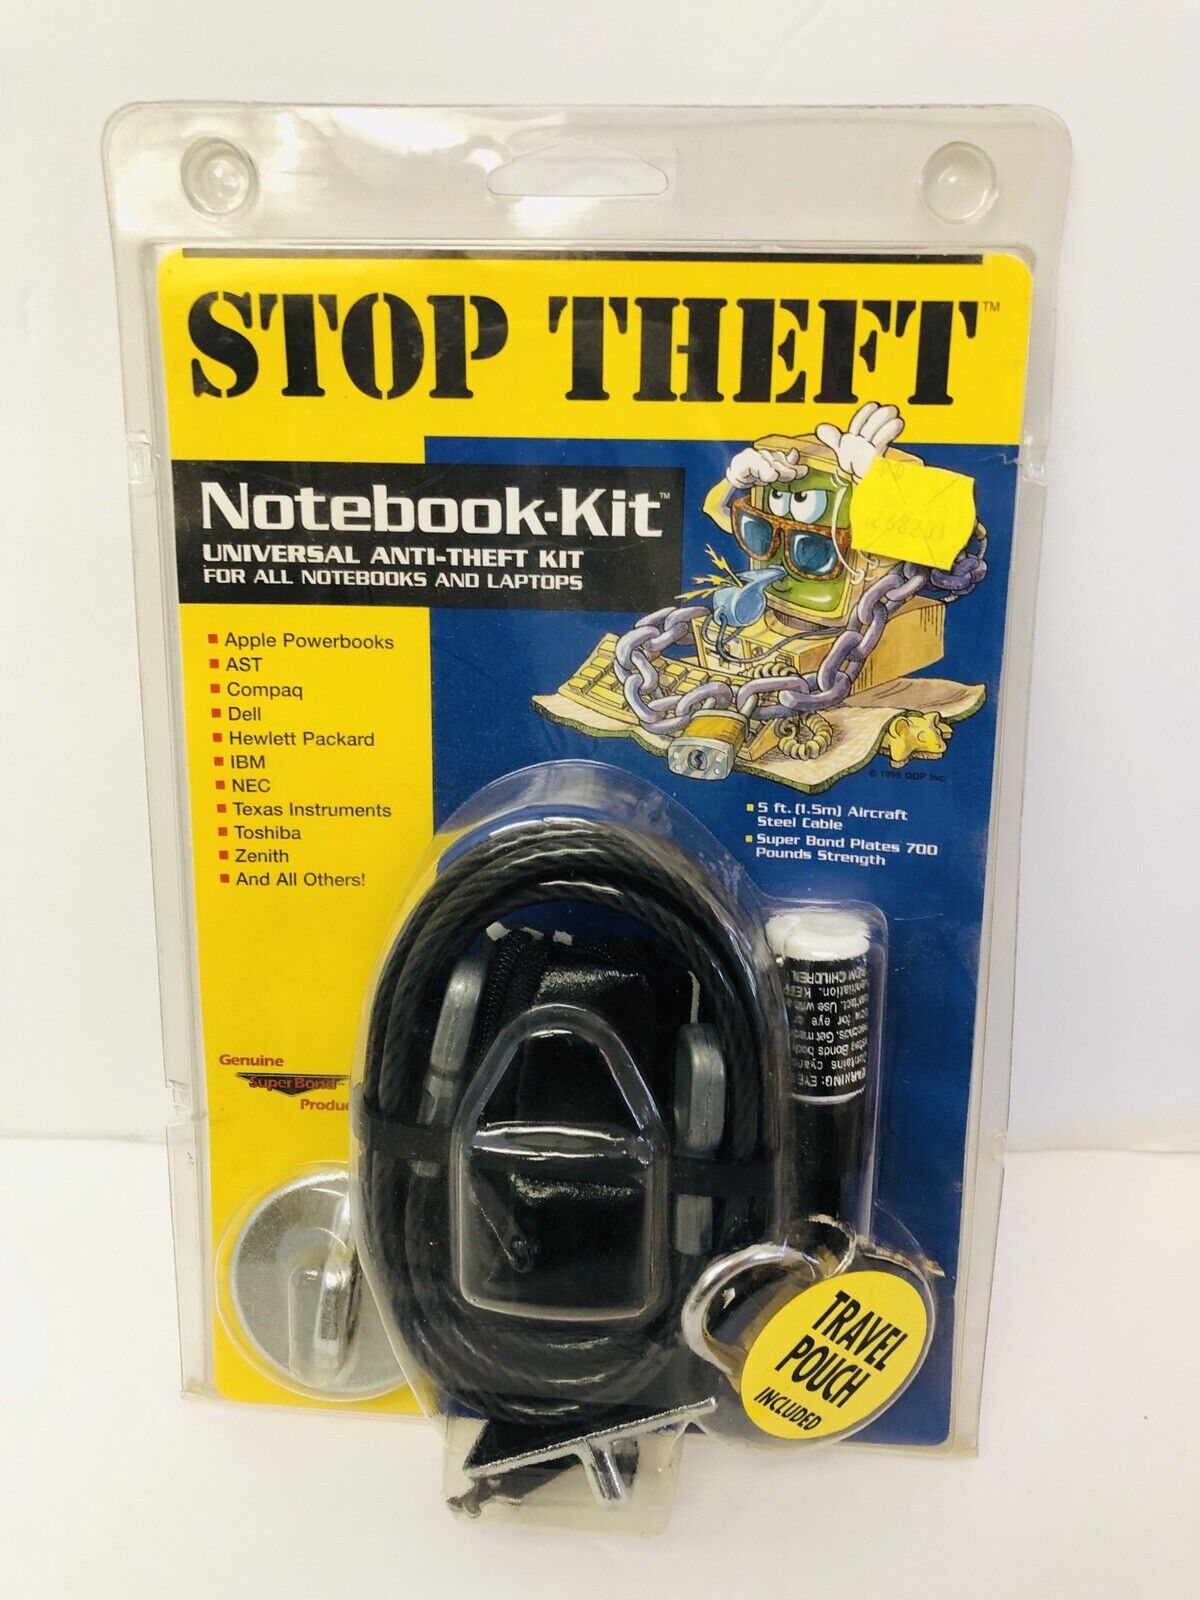 NEW Qualtec Stop Theft Notebook-Kit Universal Anti-Theft Kit W/Travel Pouch 